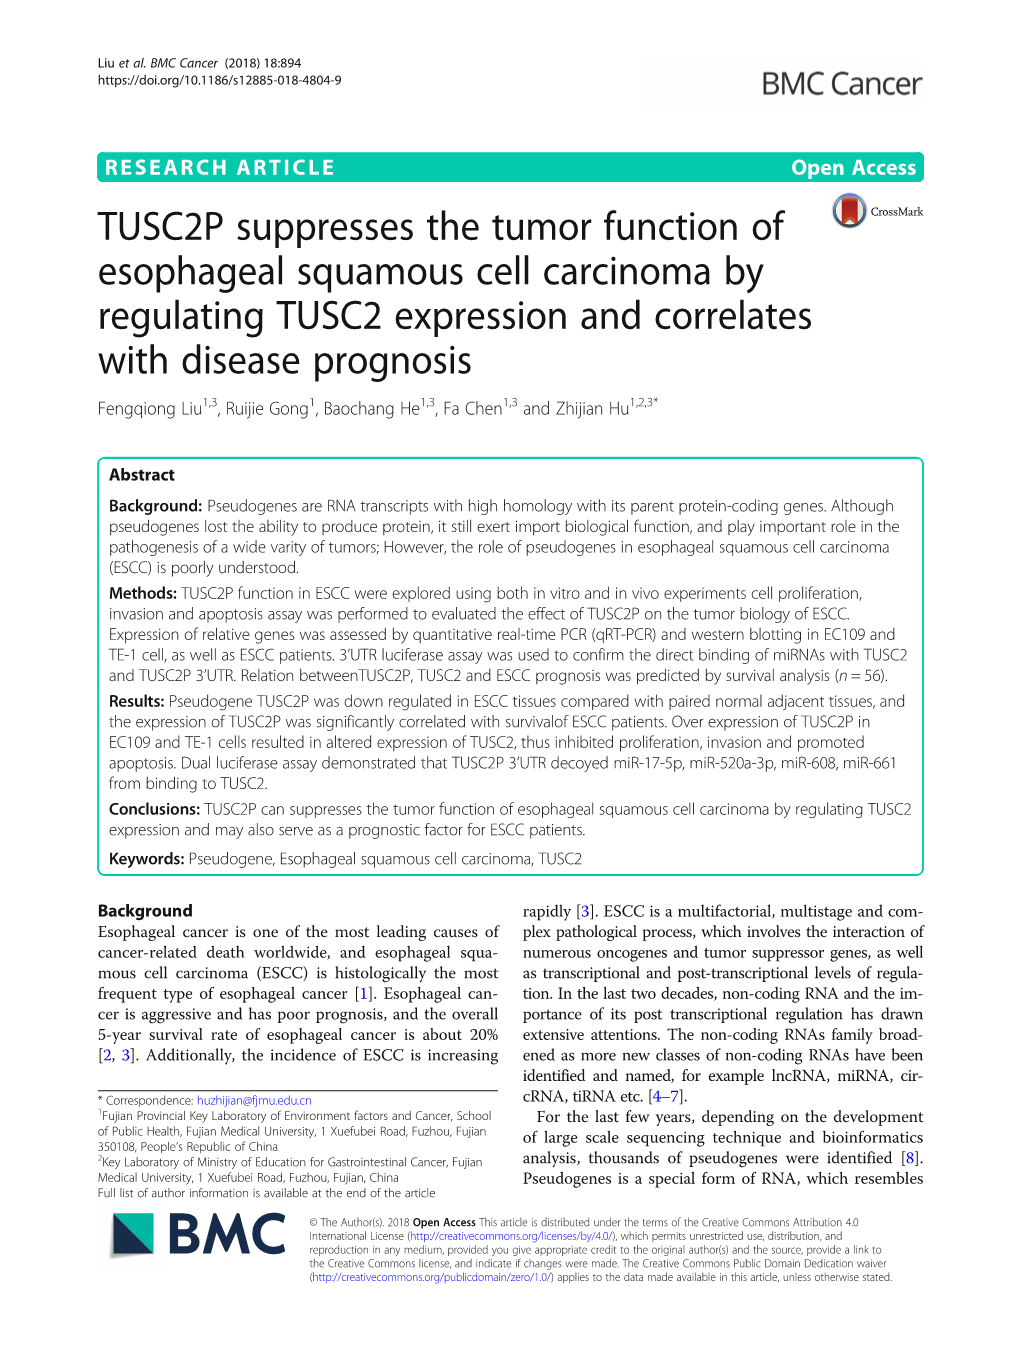 TUSC2P Suppresses the Tumor Function of Esophageal Squamous